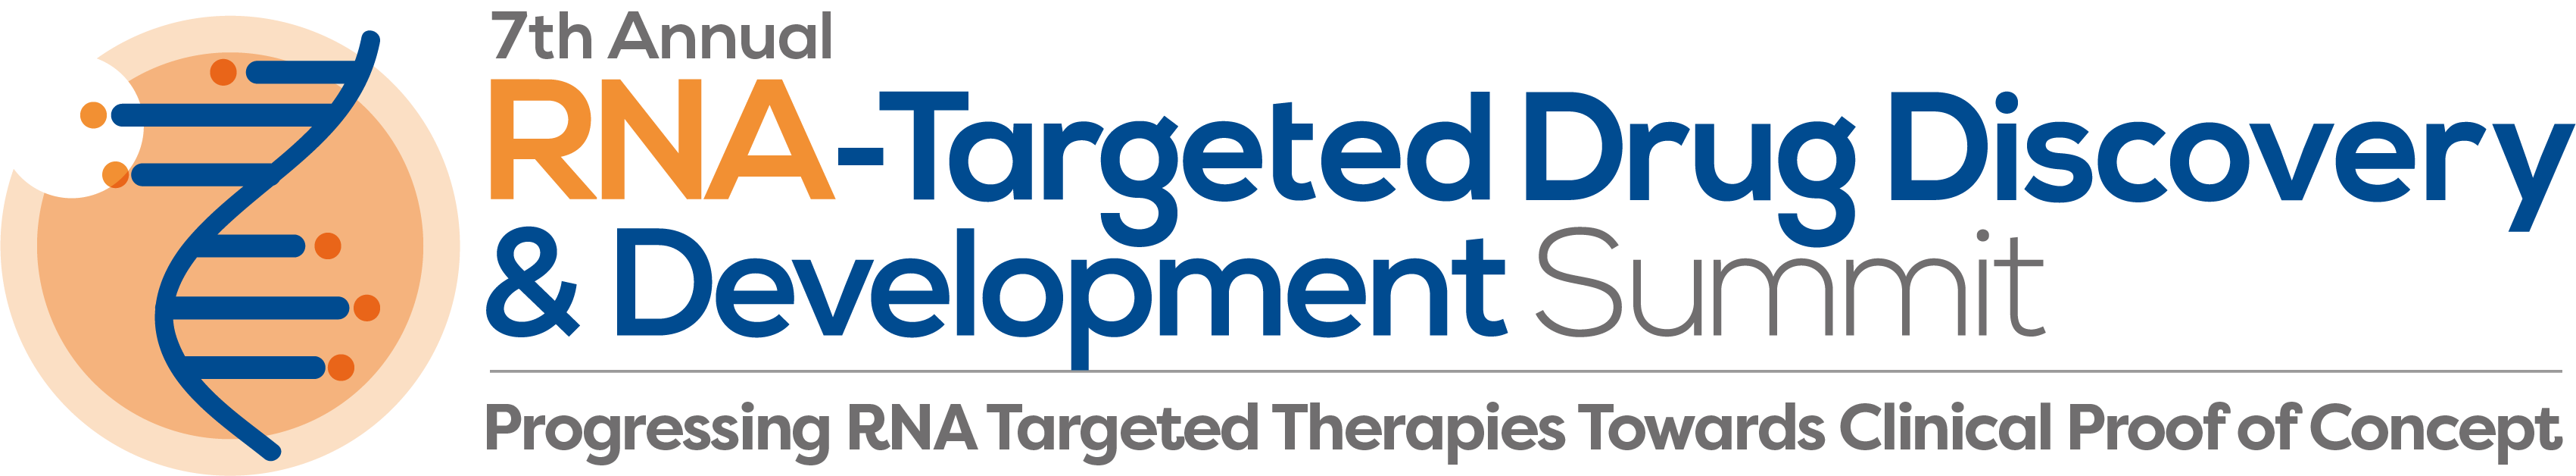 Next in Series - RNA-Targeted Drug Discovery & Development Summit